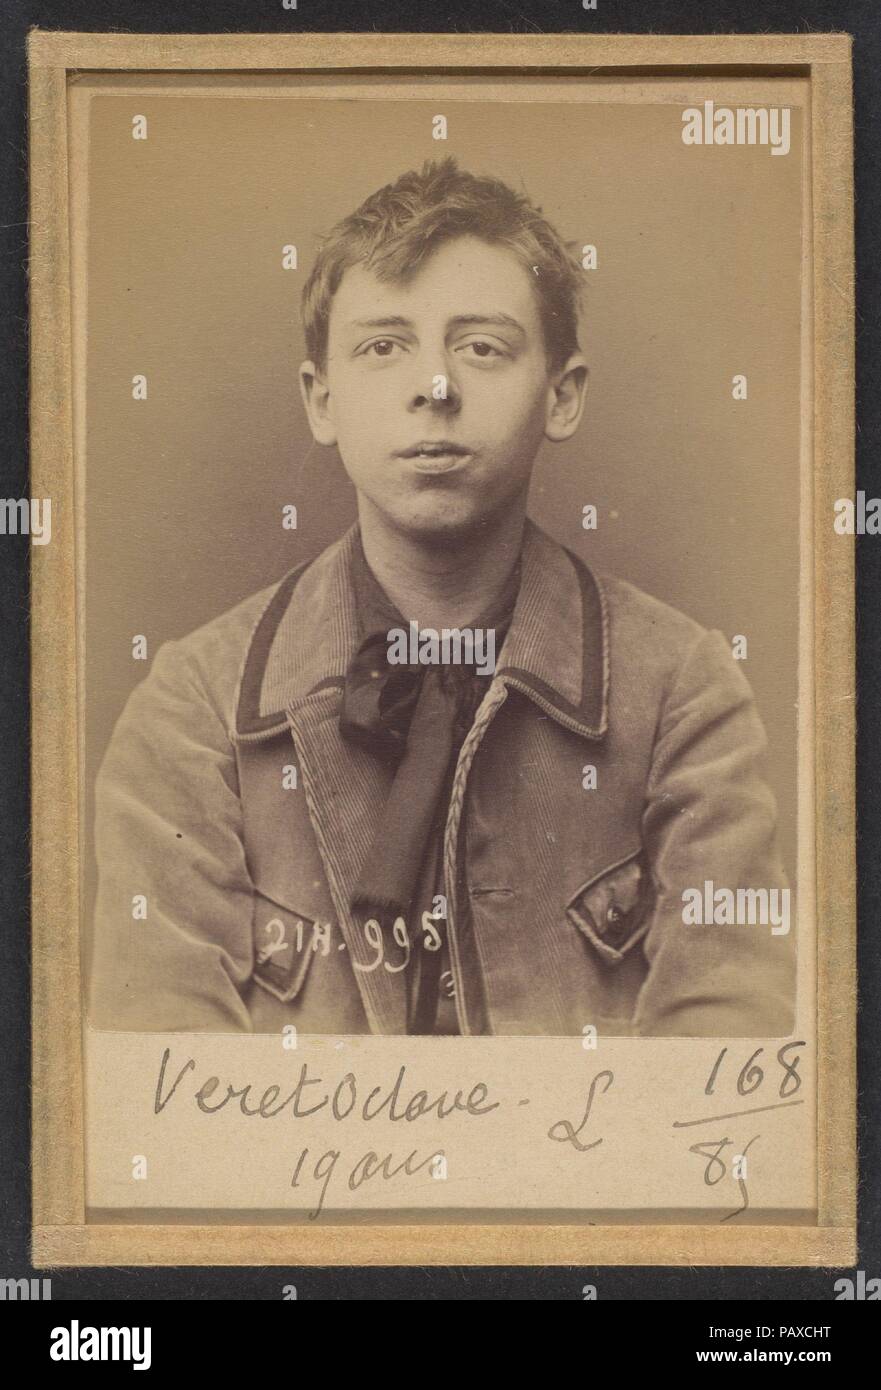 Véret. 0ctave-Jean. 19 ans, né à Paris XXe. Photographe. Anarchiste. 2/3/94. Artist: Alphonse Bertillon (French, 1853-1914). Dimensions: 10.5 x 7 x 0.5 cm (4 1/8 x 2 3/4 x 3/16 in.) each. Date: 1894.  Born into a distinguished family of scientists and statisticians, Bertillon began his career as a clerk in the Identification Bureau of the Paris Prefecture of Police in 1879. Tasked with maintaining reliable police records of offenders, he developed the first modern system of criminal identification. The system, which became known as Bertillonage, had three components: anthropometric measurement Stock Photo